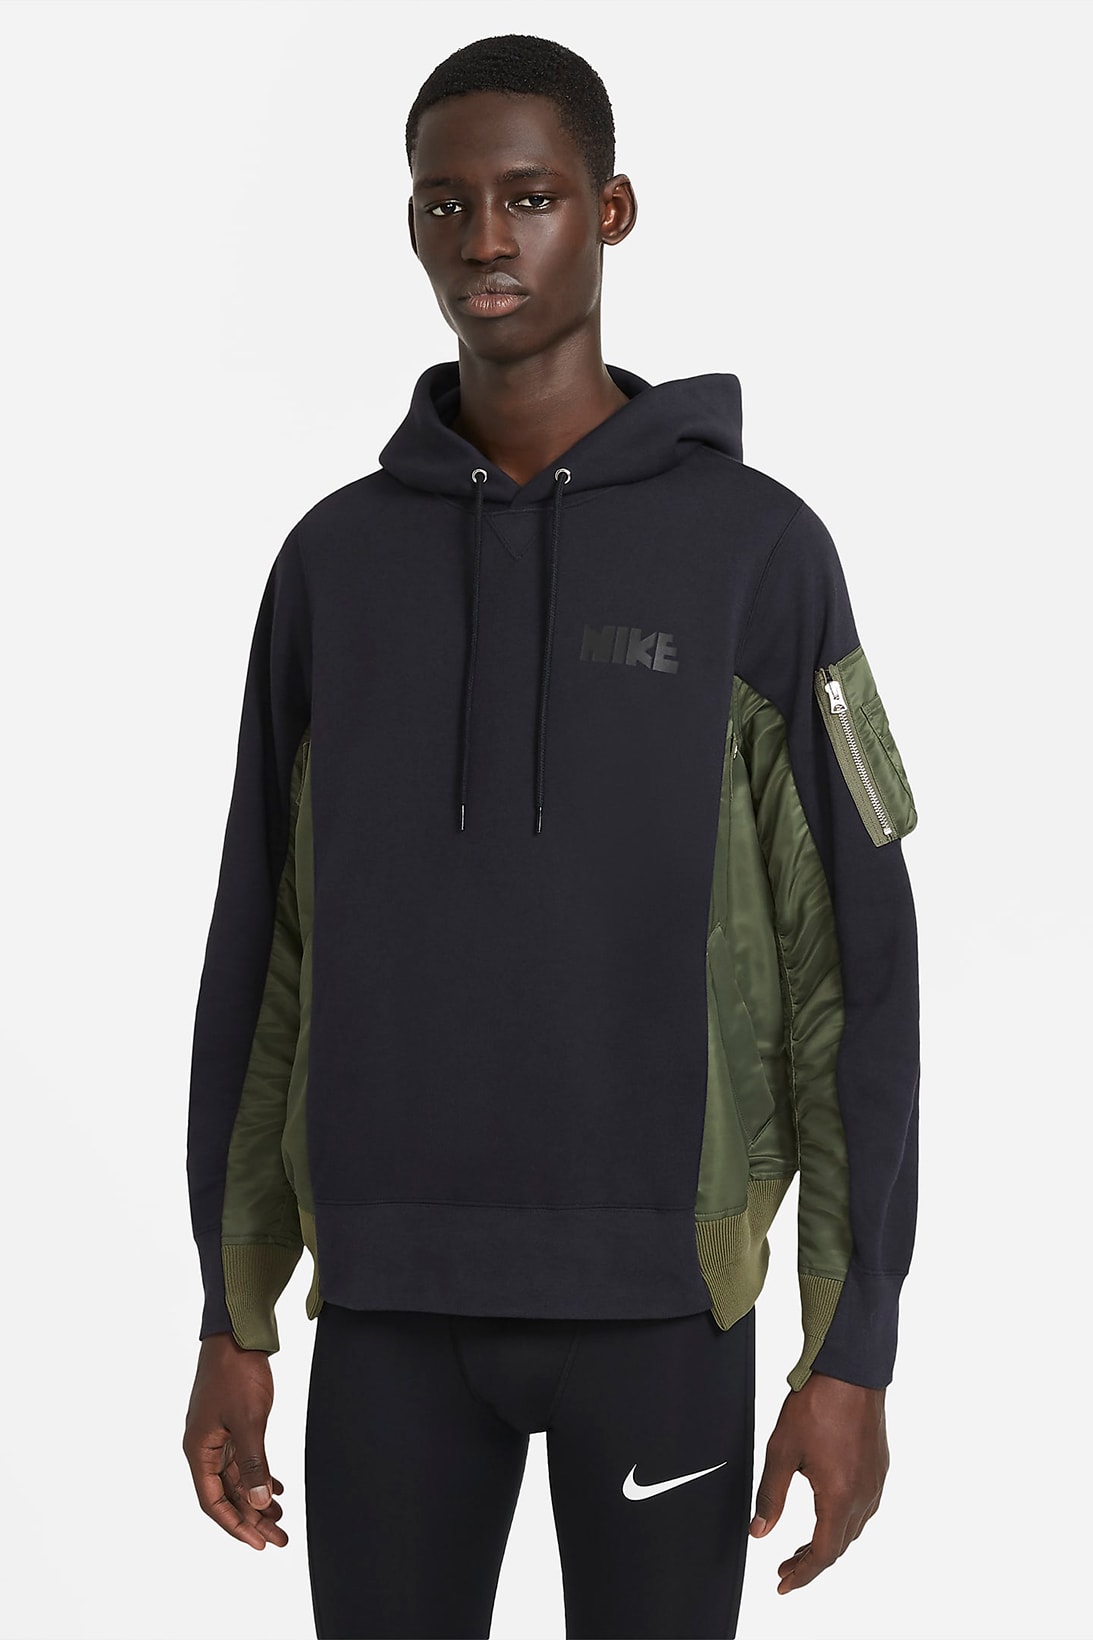 sacai nike collaboration outerwear collection jackets hoodie parka